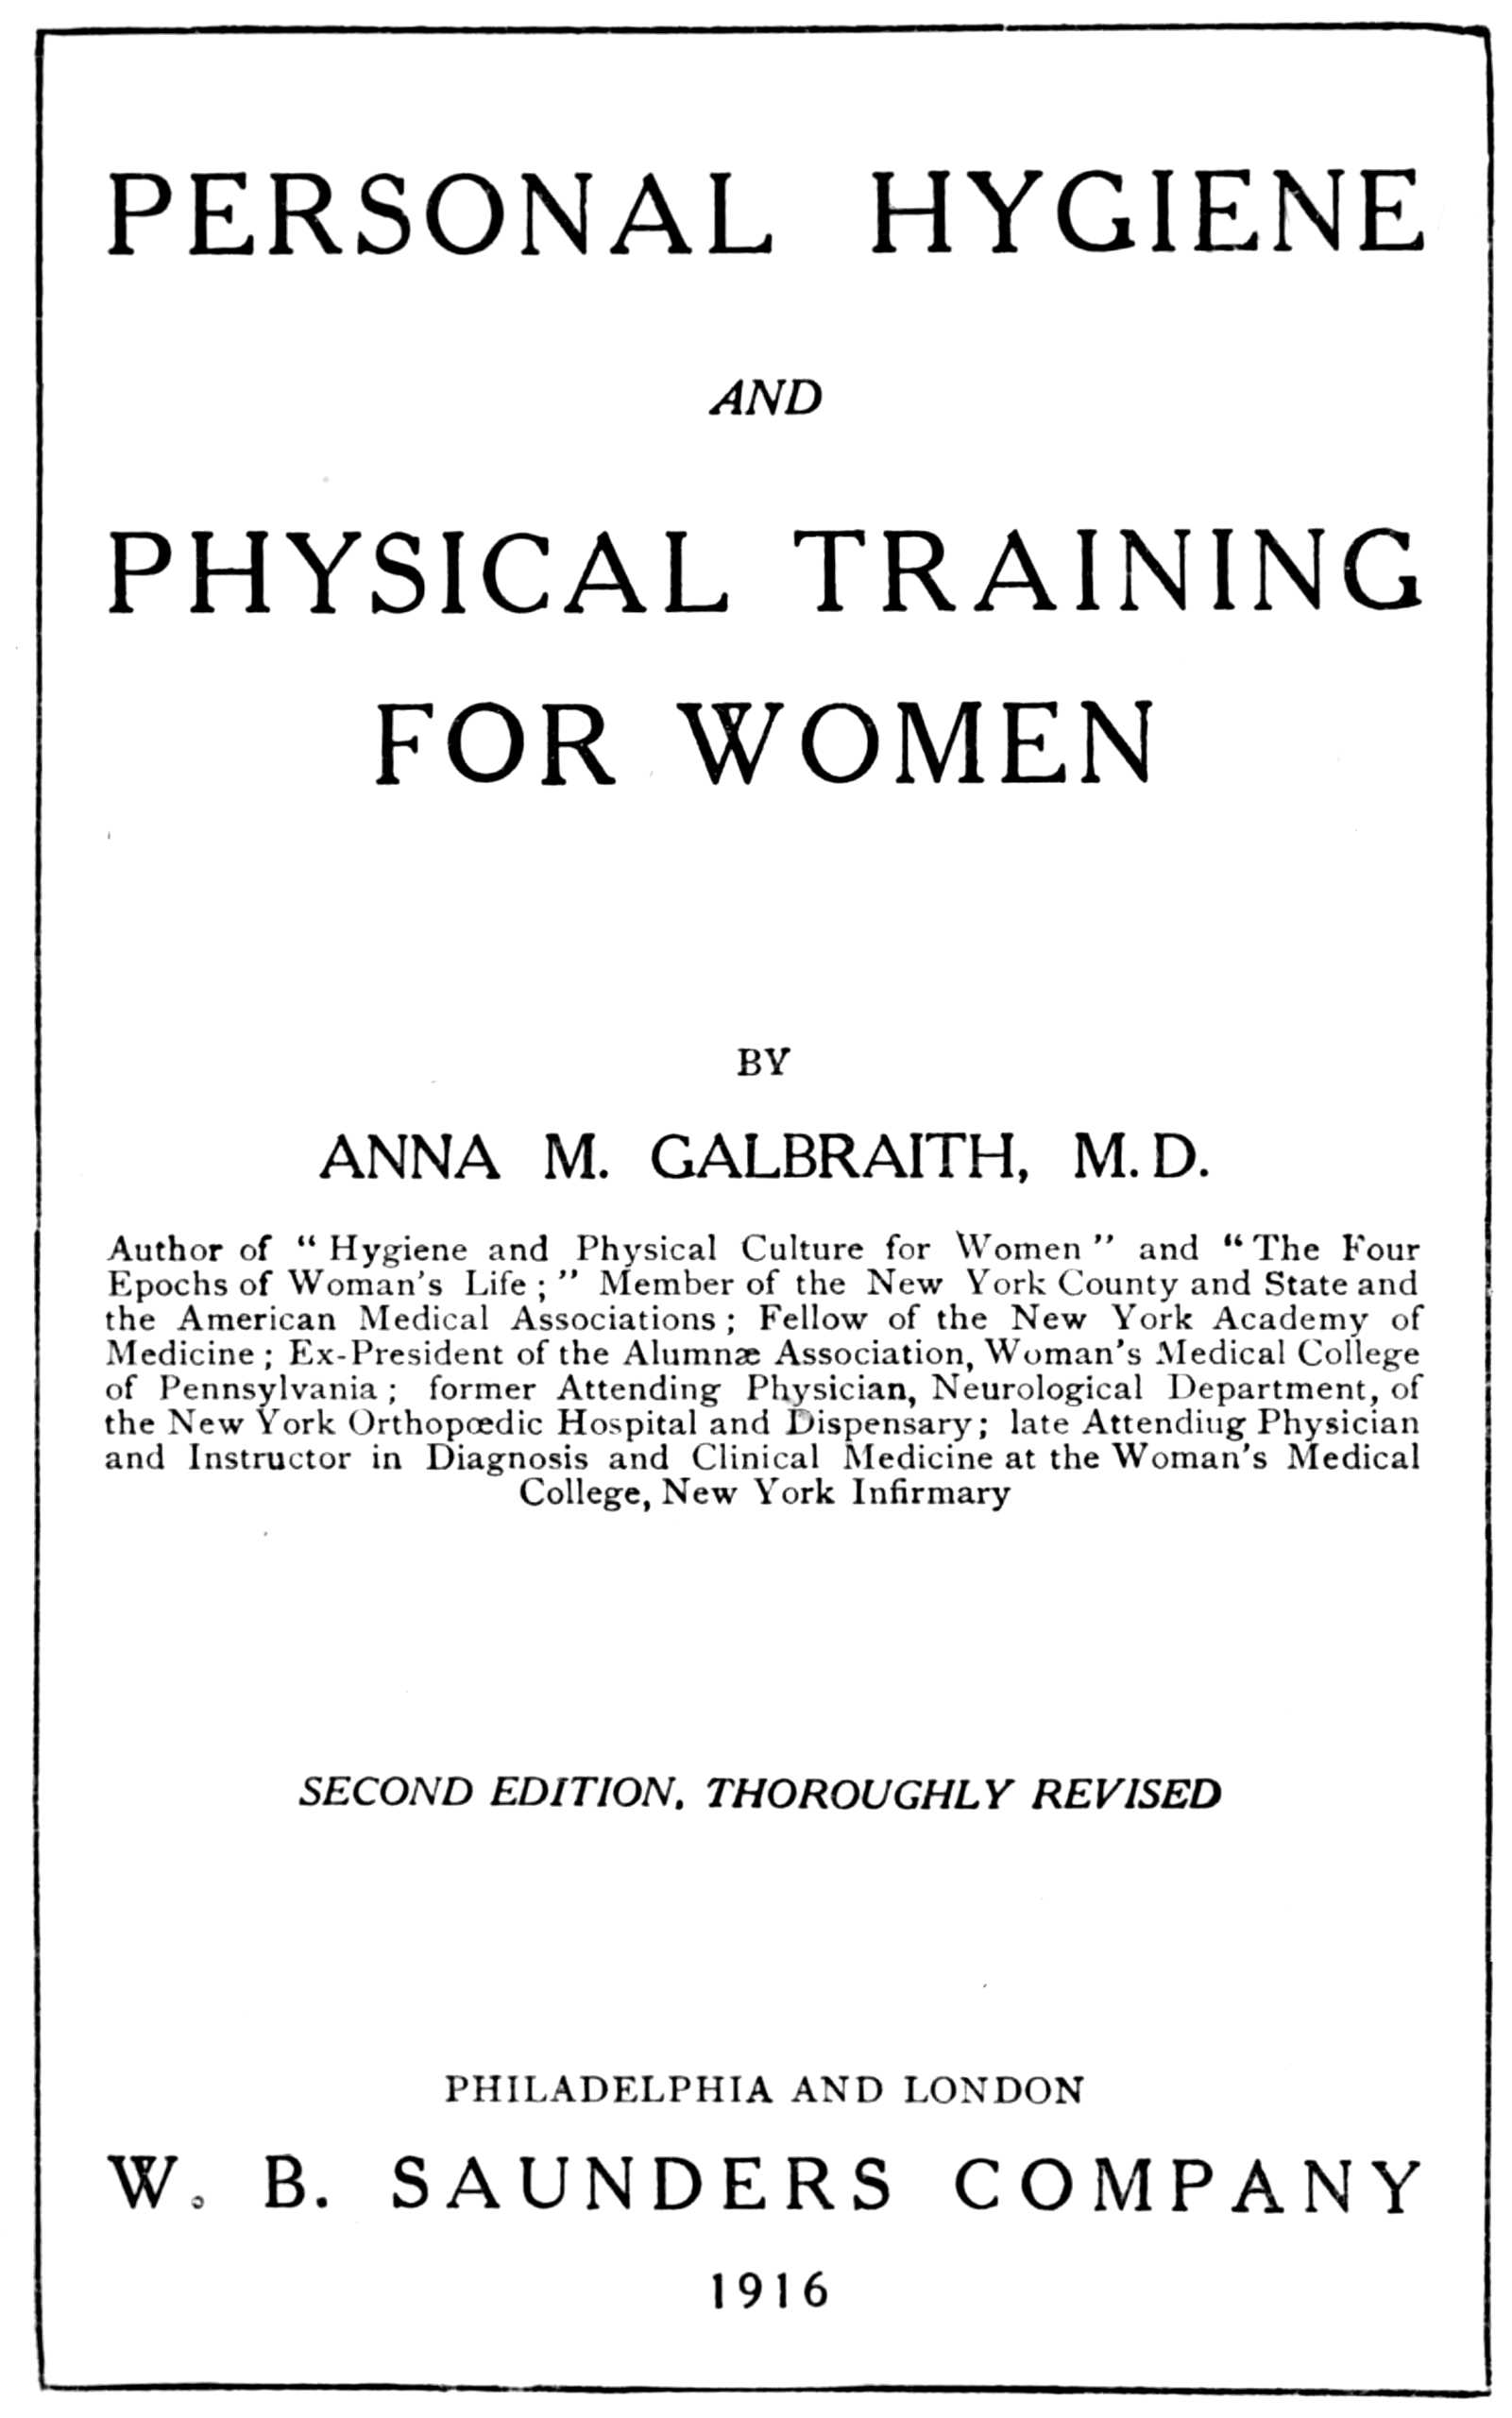 Personal hygiene and physical training for women | Project Gutenberg